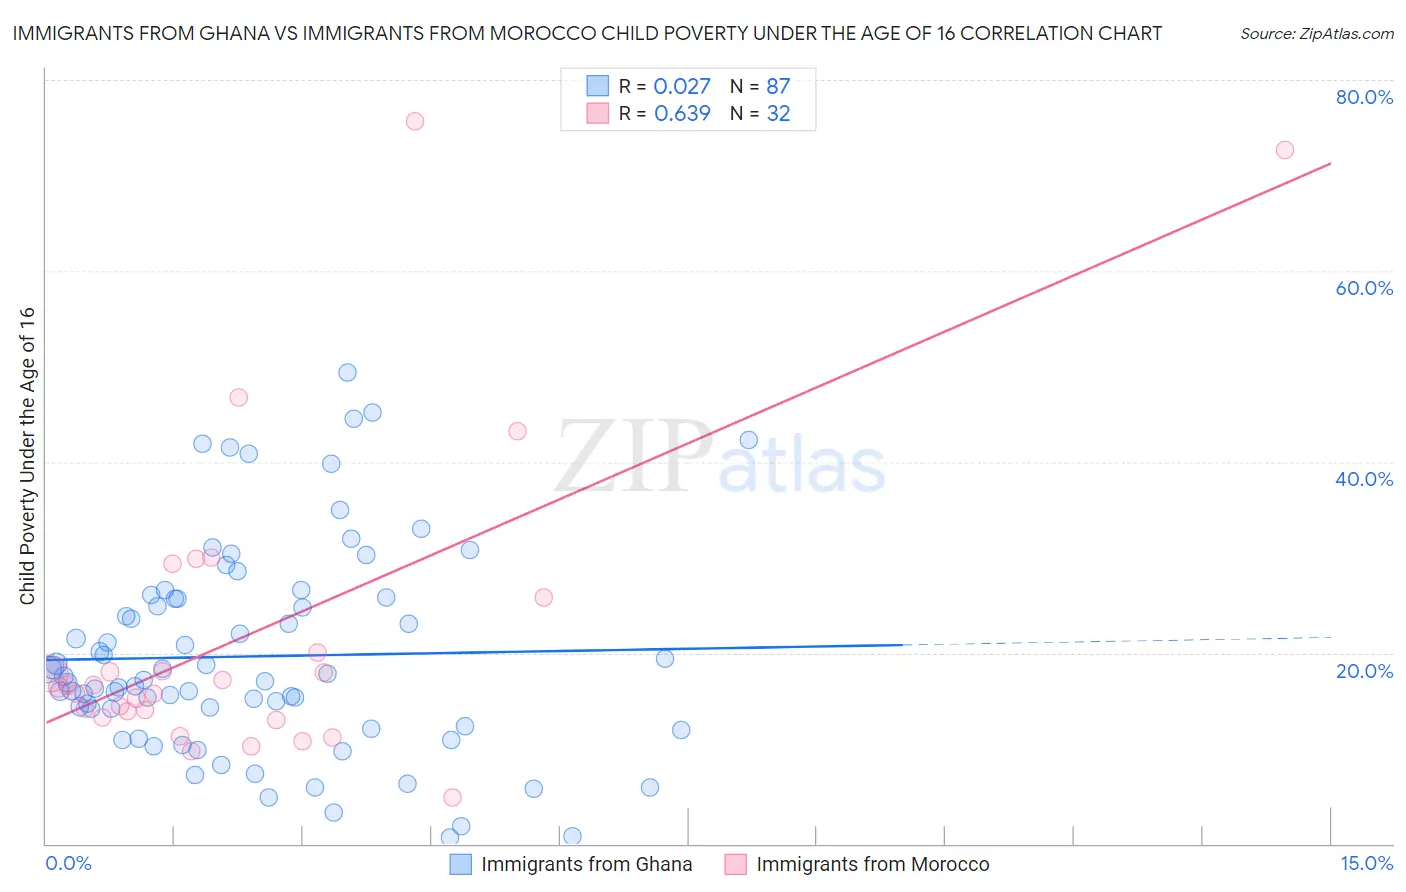 Immigrants from Ghana vs Immigrants from Morocco Child Poverty Under the Age of 16